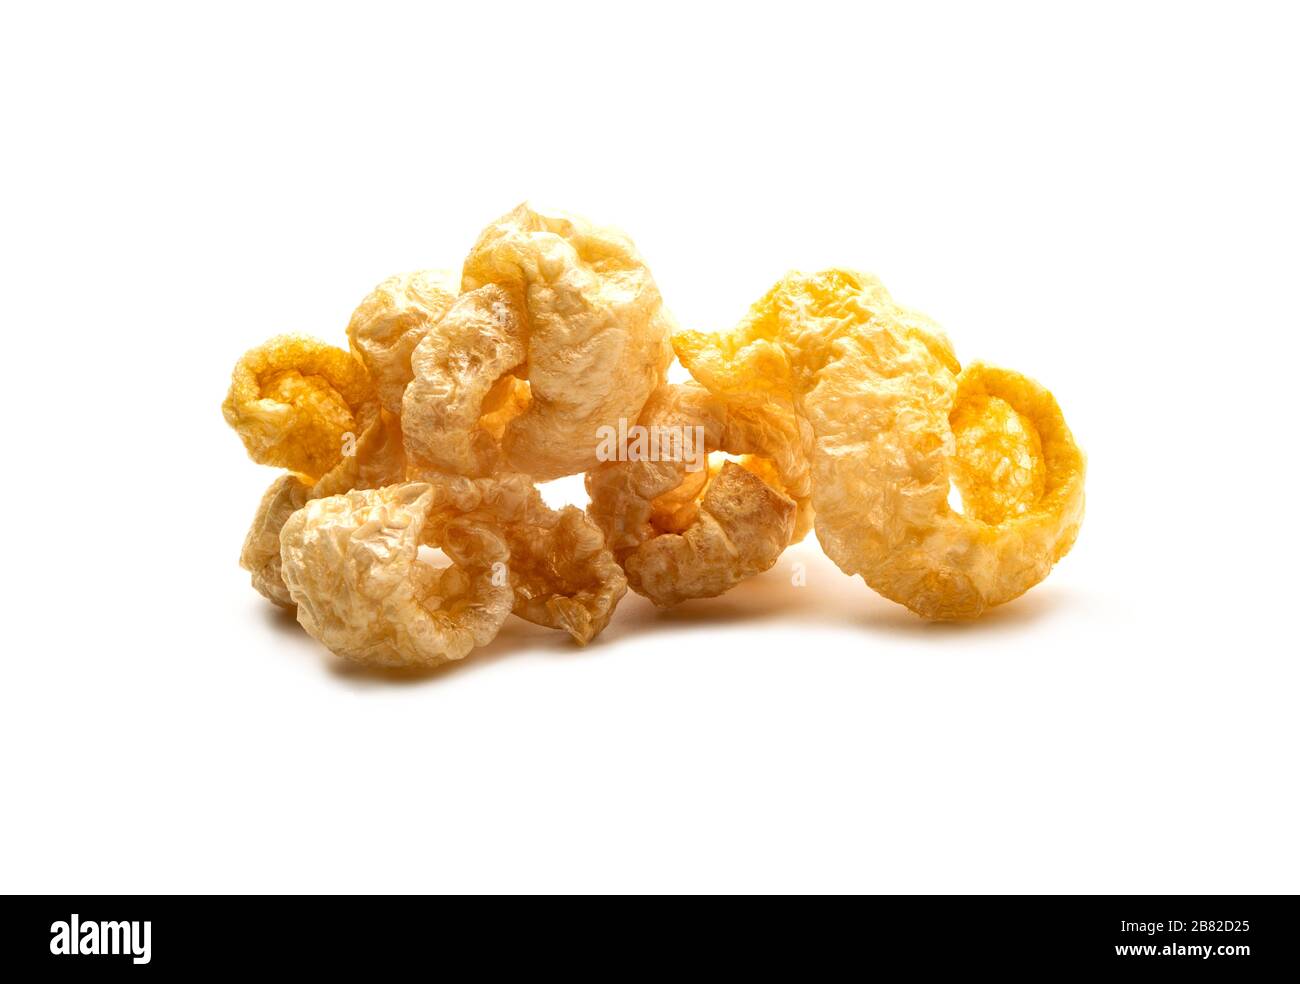 Pork snack crispy and blistered isolated on white background. Crispy pork skin pieces. Food concept. Stock Photo